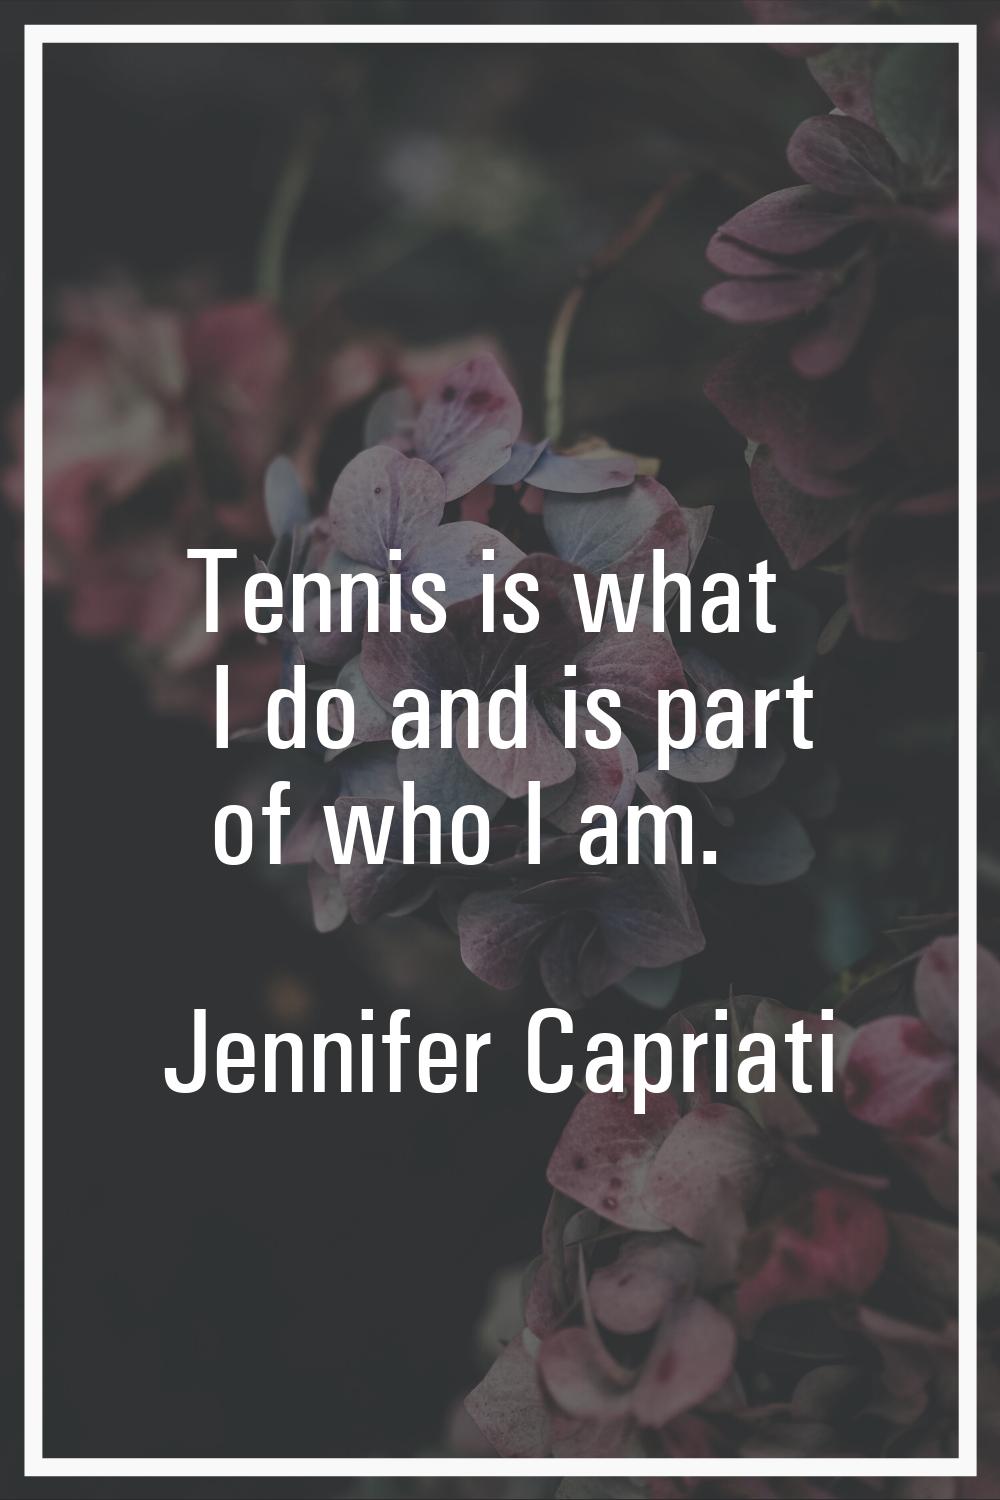 Tennis is what I do and is part of who I am.